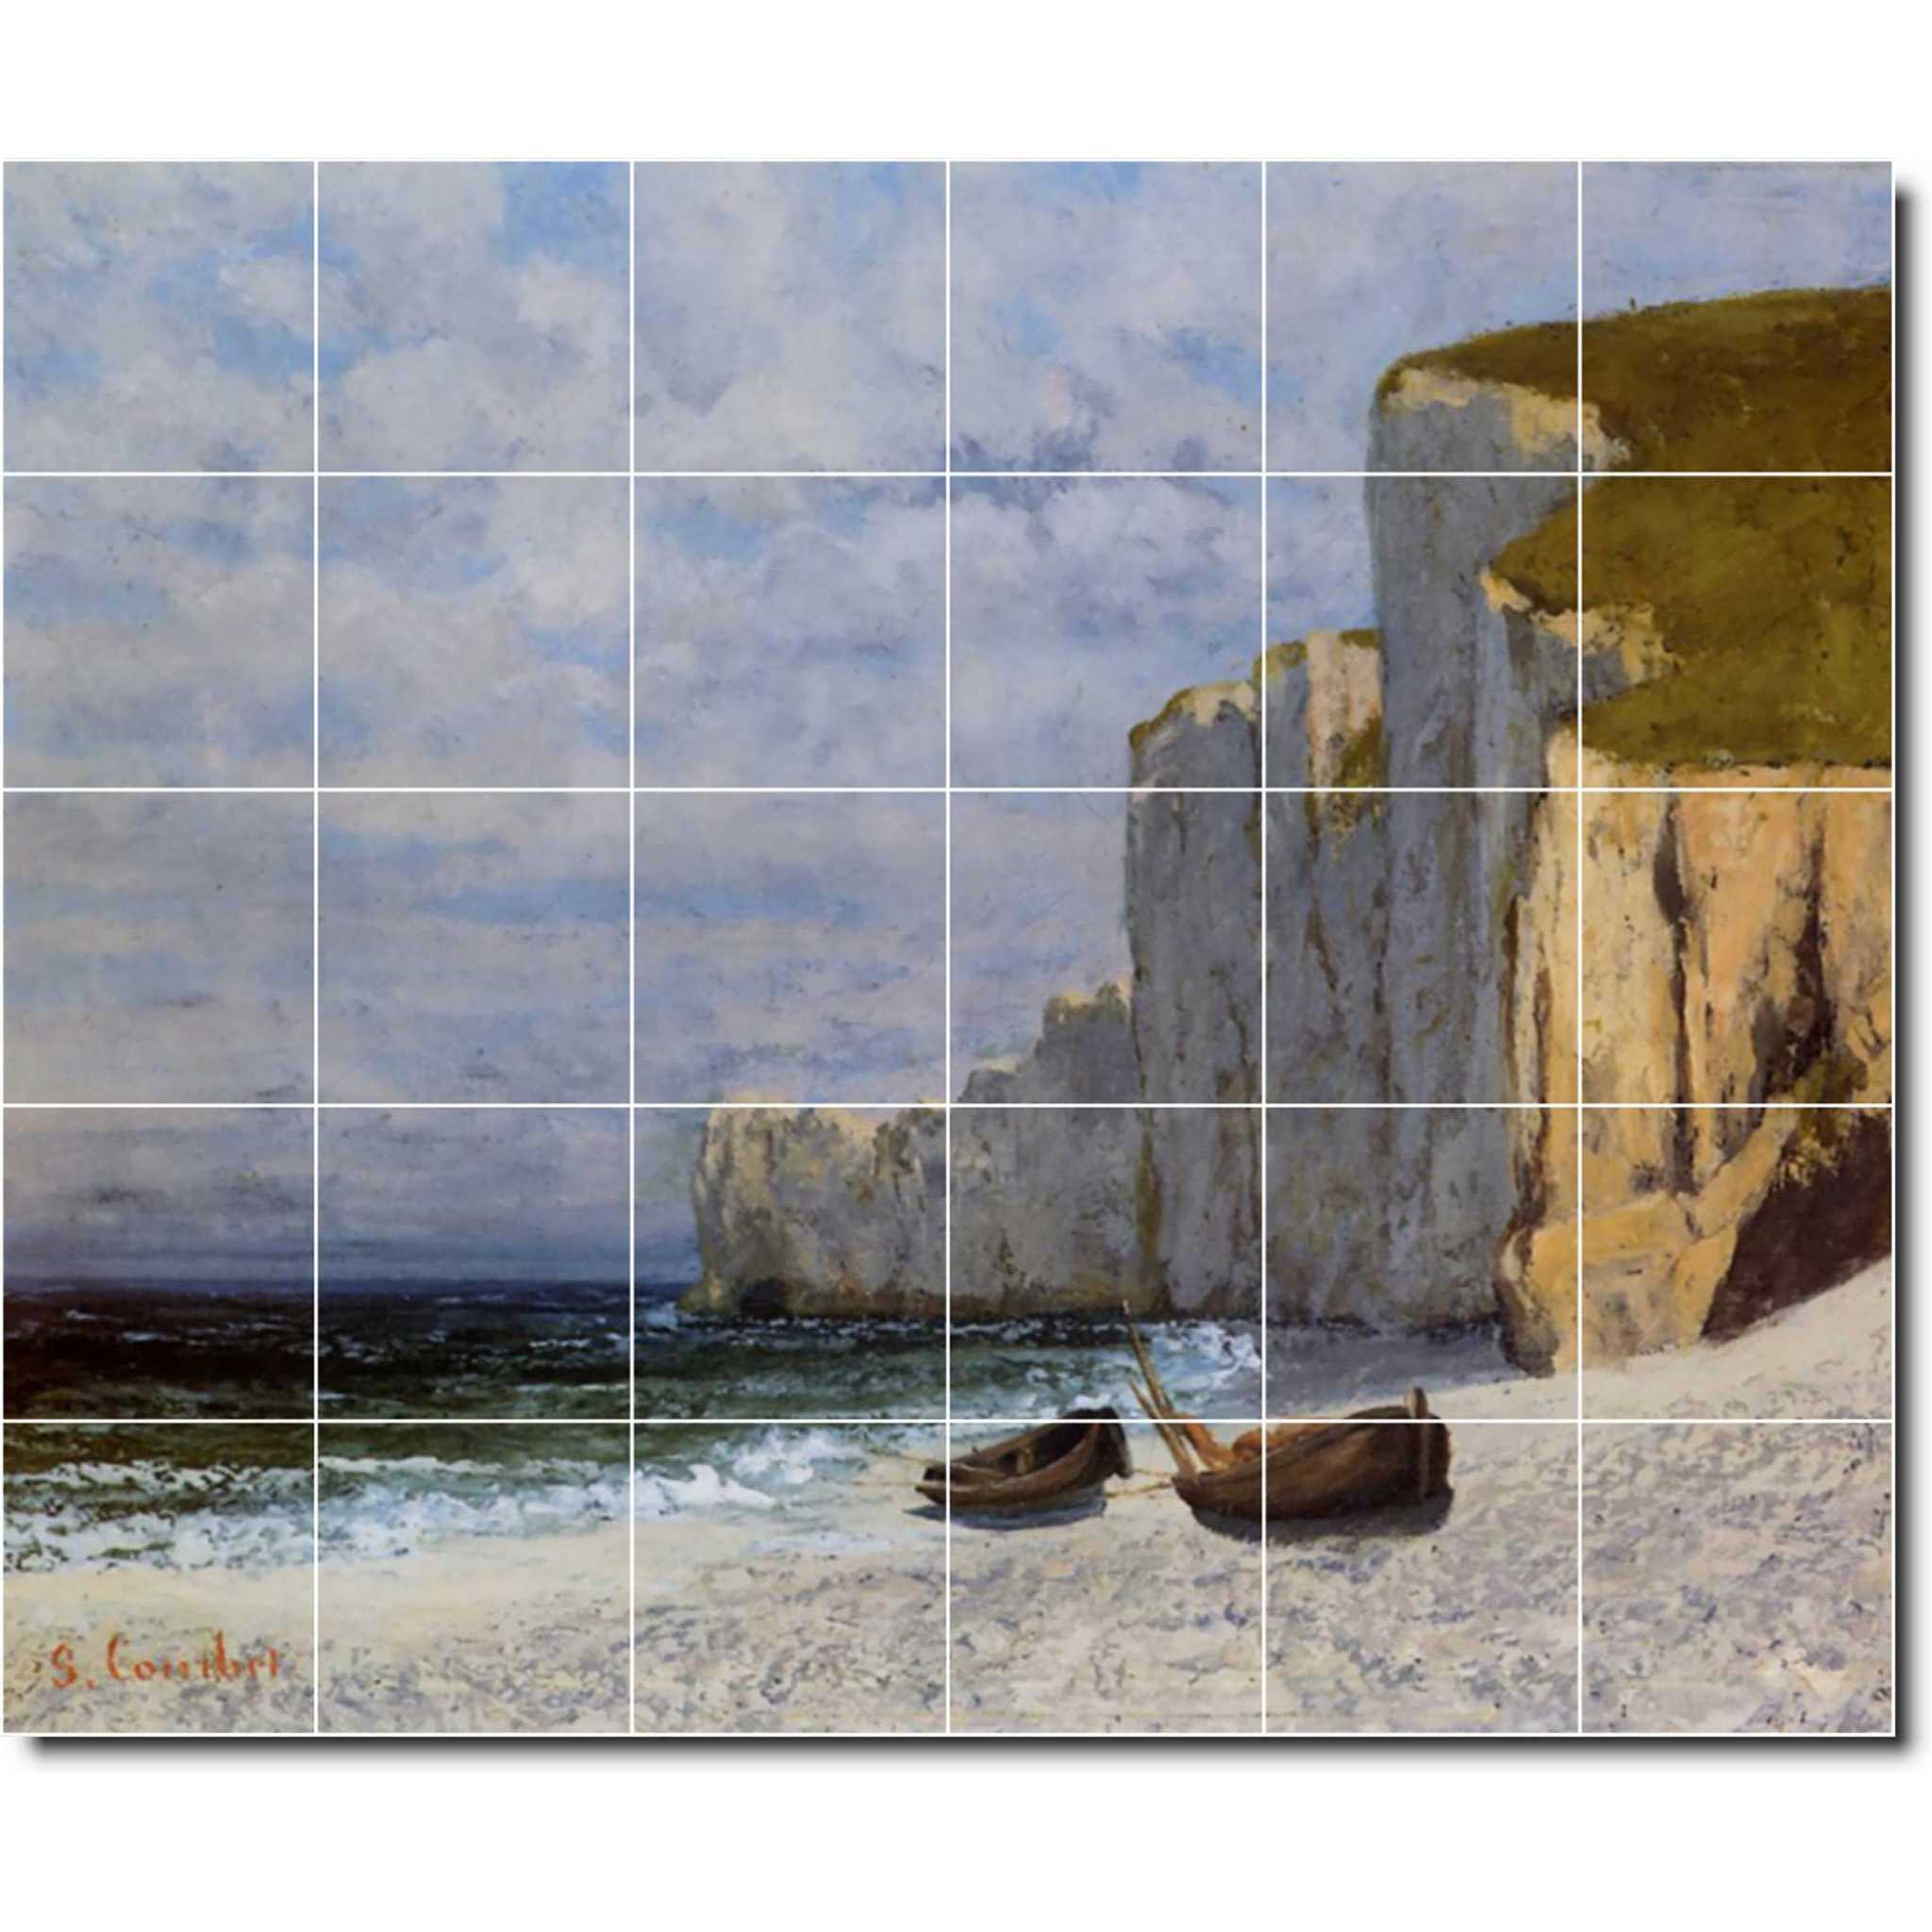 gustave courbet waterfront painting ceramic tile mural p02157